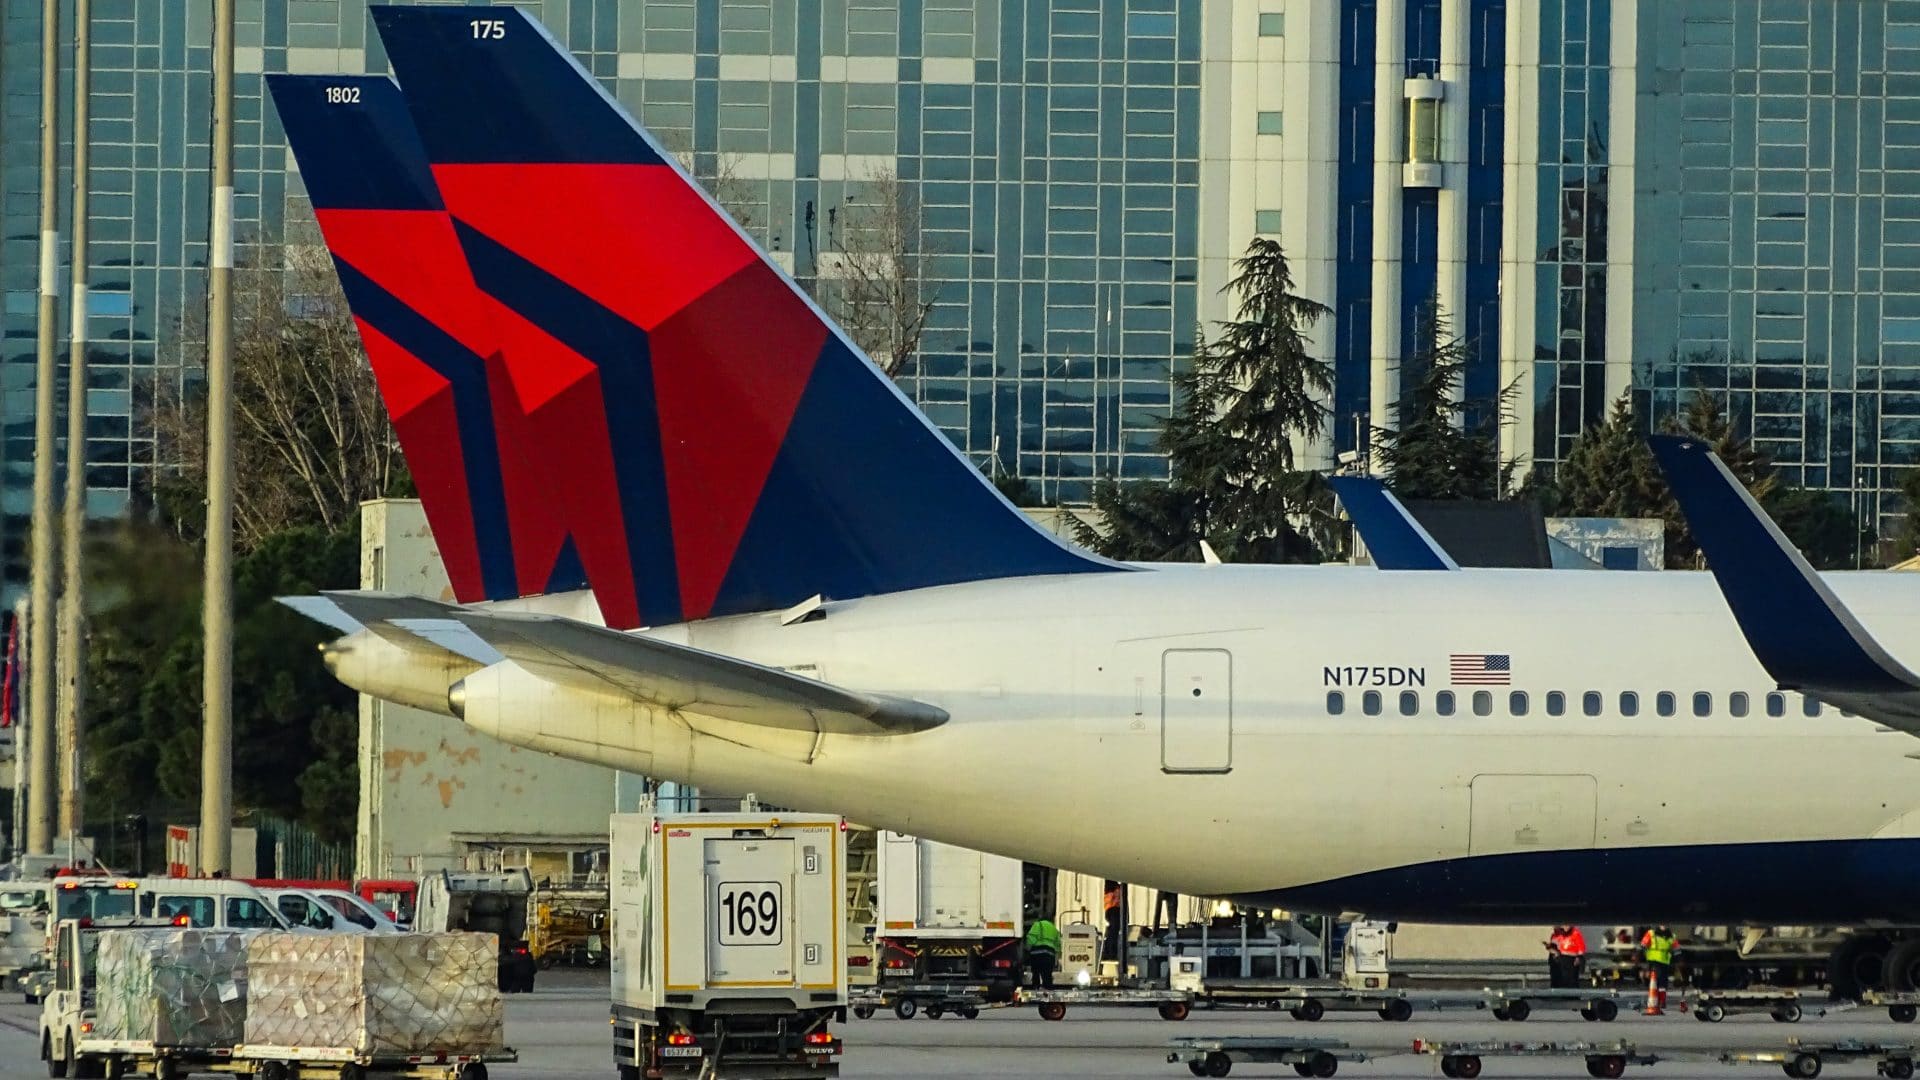 Delta Air Lines Expands Flight Routes to Europe, Including New York JFK to Munich